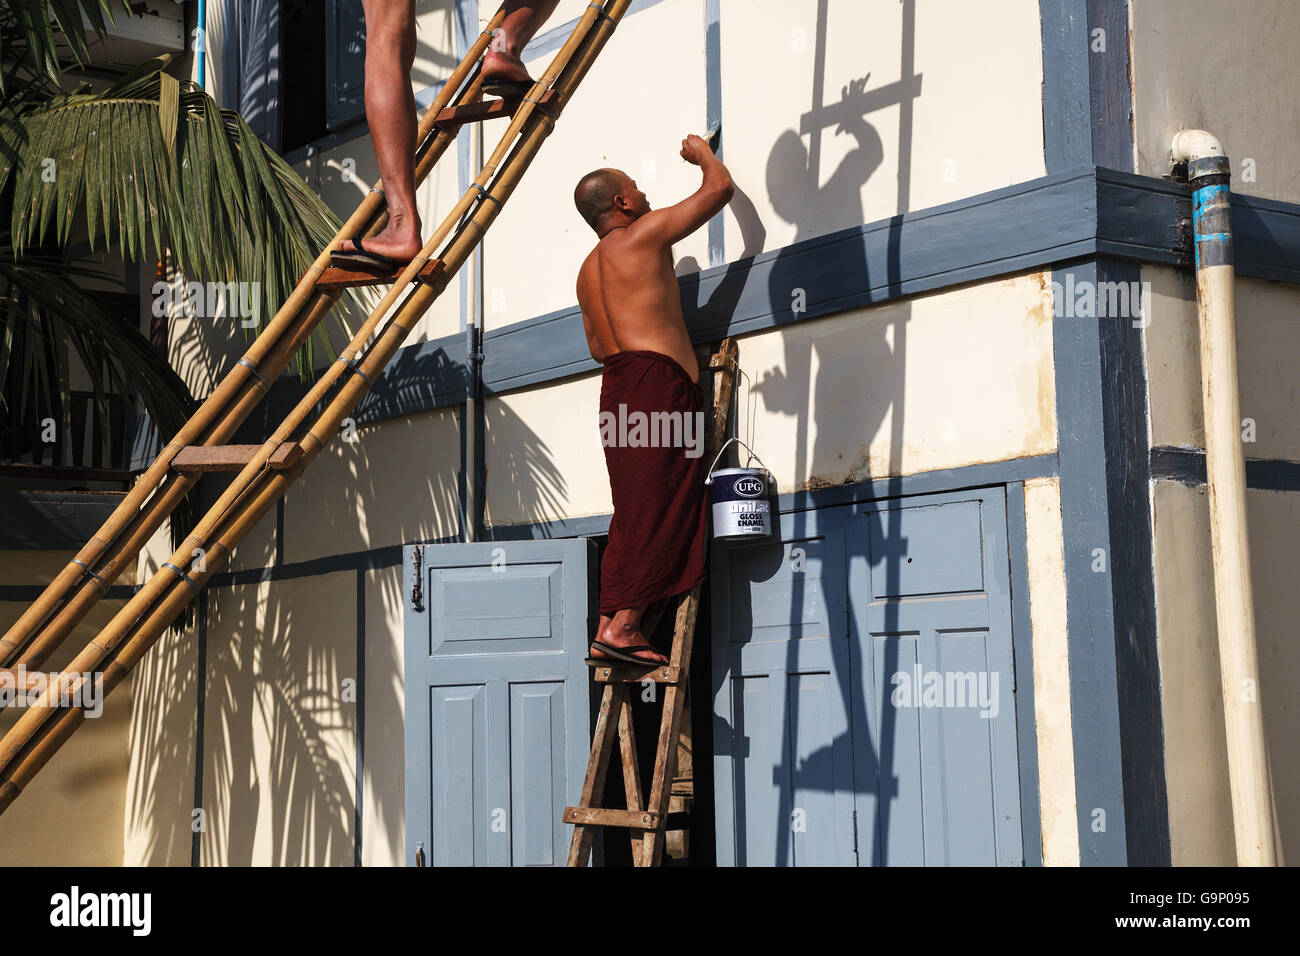 Buddhist monks paint a building at monastery in Pyin Oo Lwin, Myanmar. Stock Photo